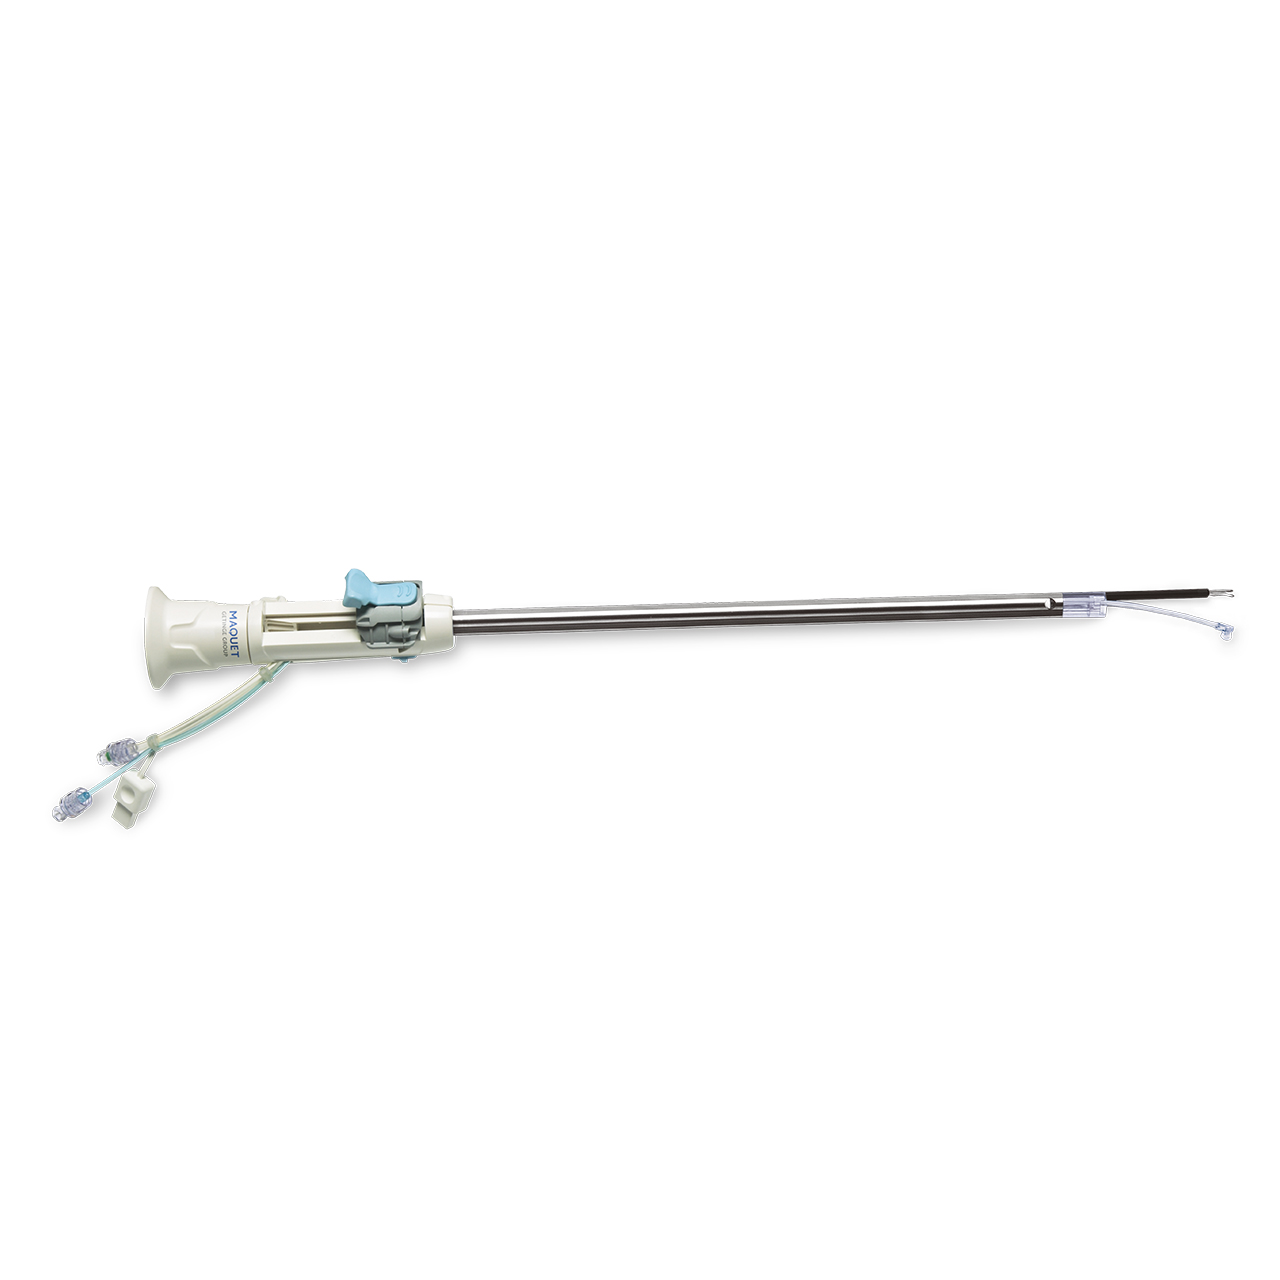 Vasoview 6 Pro Endoscopic Vessel Harvesting System for quality conduit harvesting of the saphenous vein and radial artery